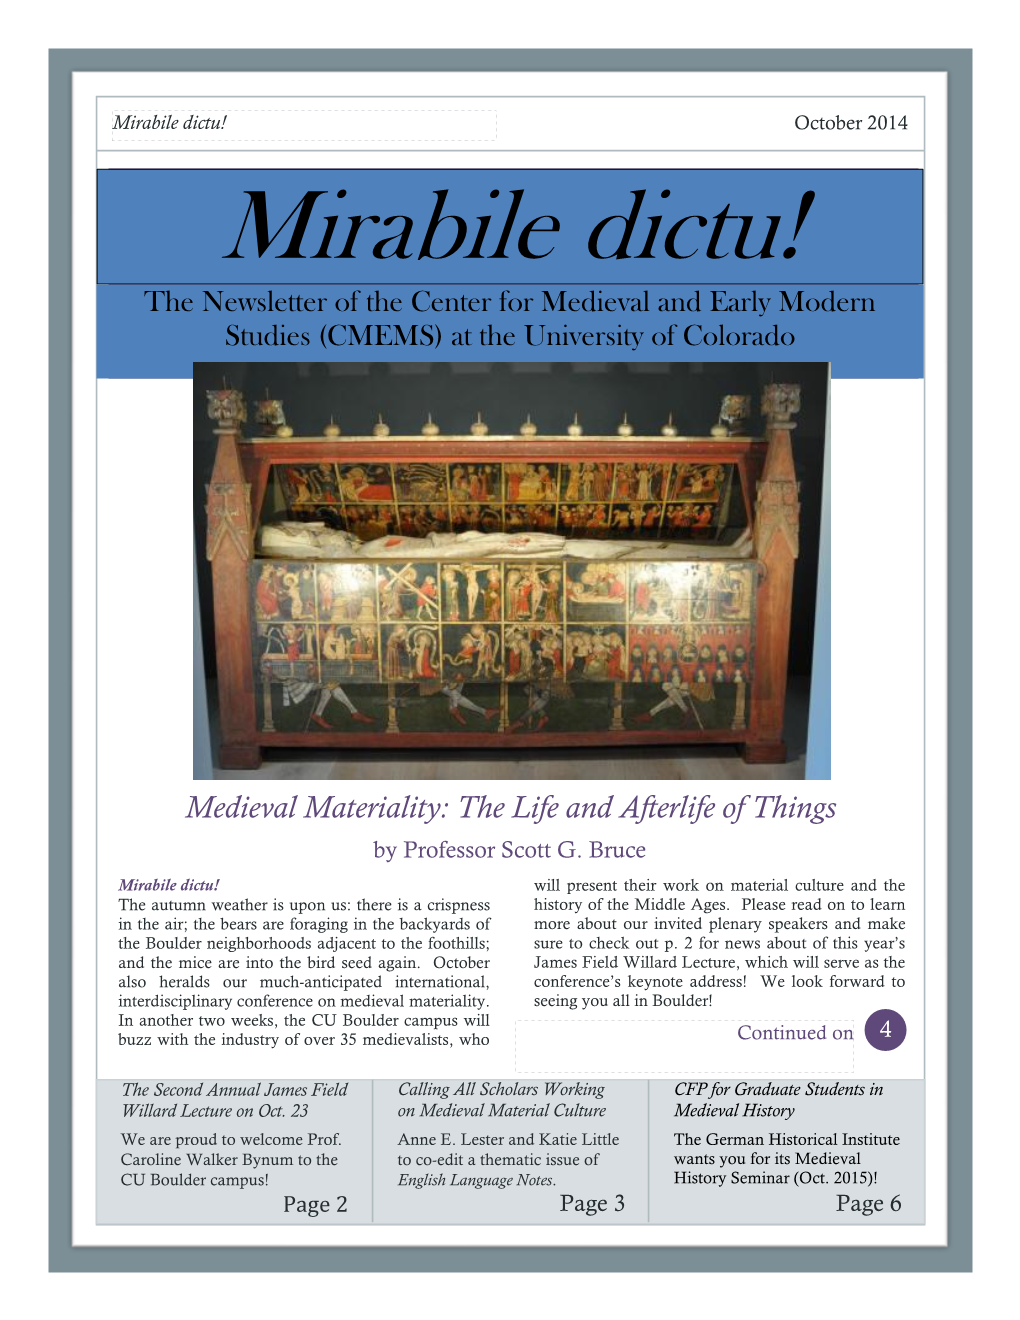 Mirabile Dictu! October 2014 Mirabile Dictu! the Newsletter of the Center for Medieval and Early Modern Studies (CMEMS) at the University of Colorado